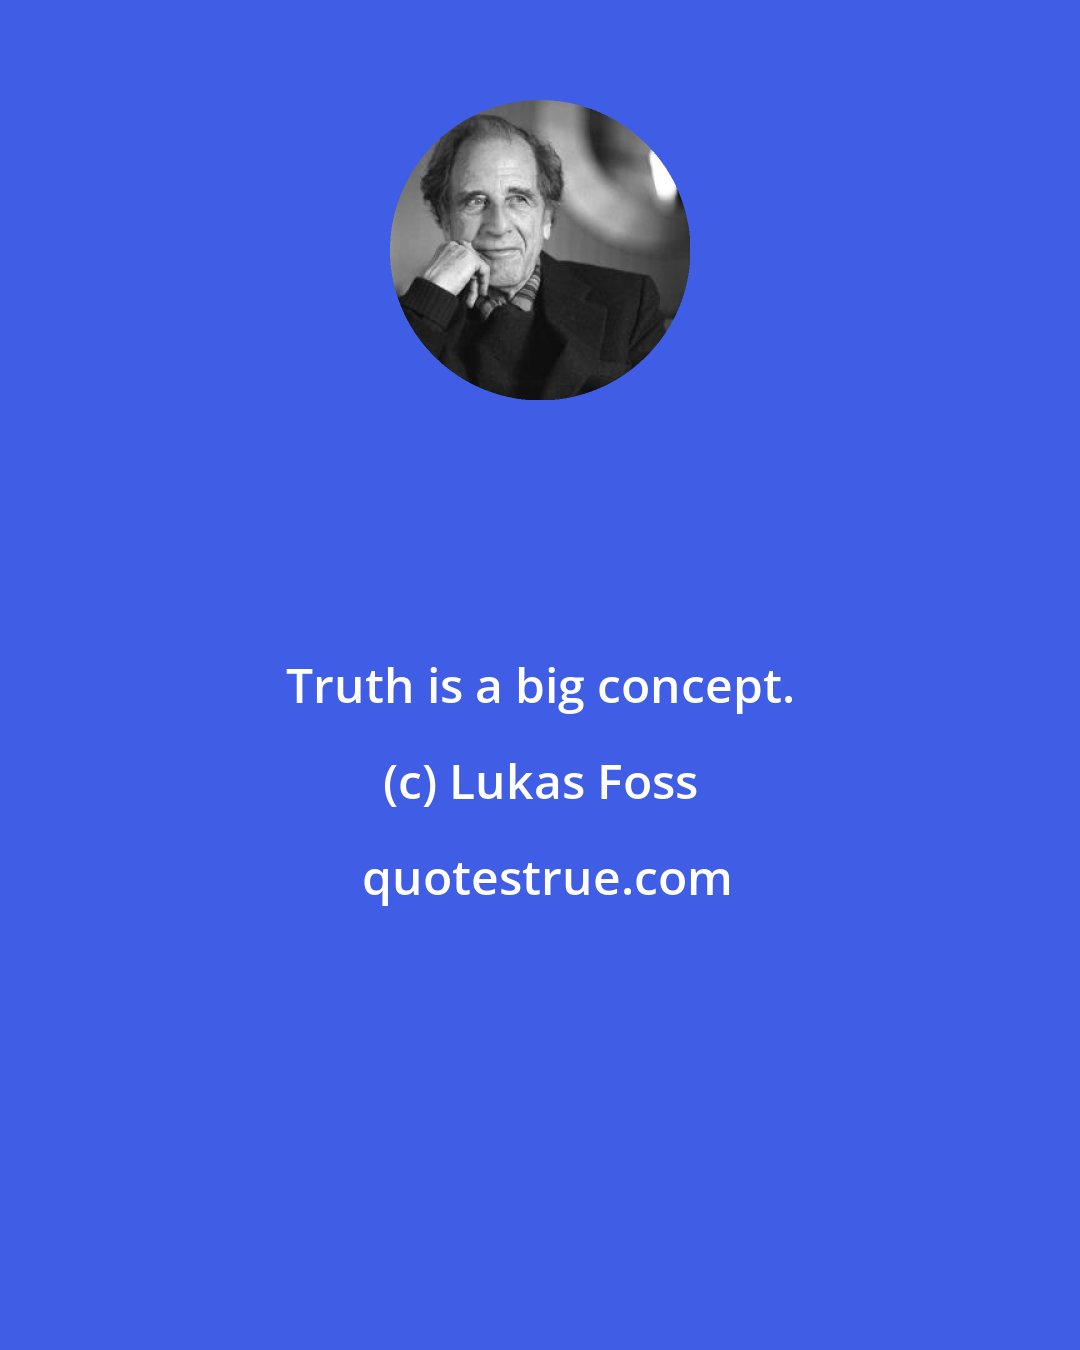 Lukas Foss: Truth is a big concept.